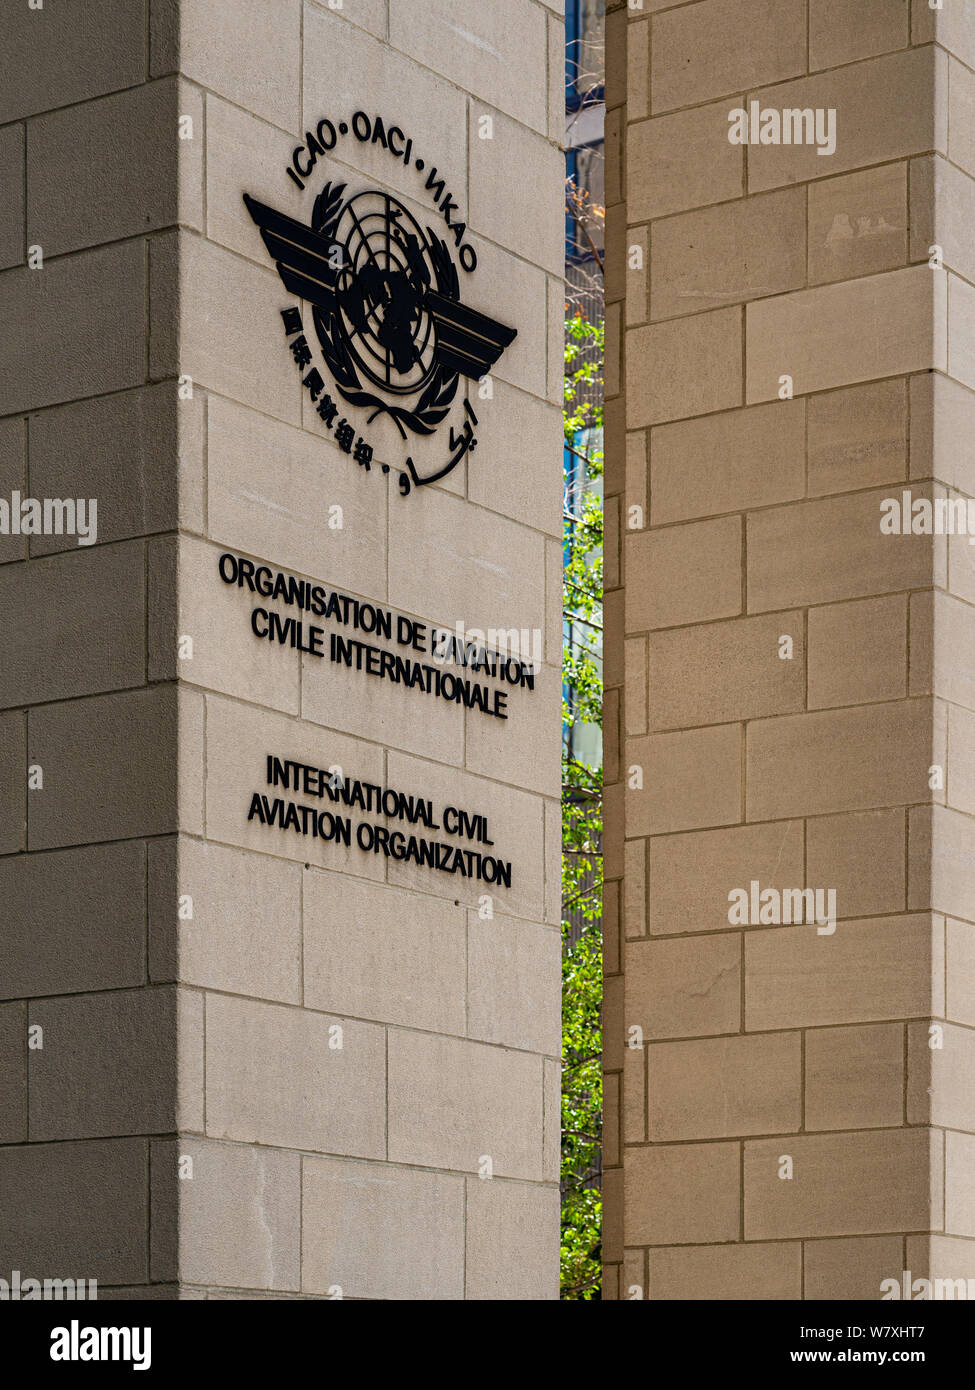 Montreal, Canada - August 6, 2019: International Civil Aviation Organization sign on building exterior. Taken on a sunny summer morning Stock Photo